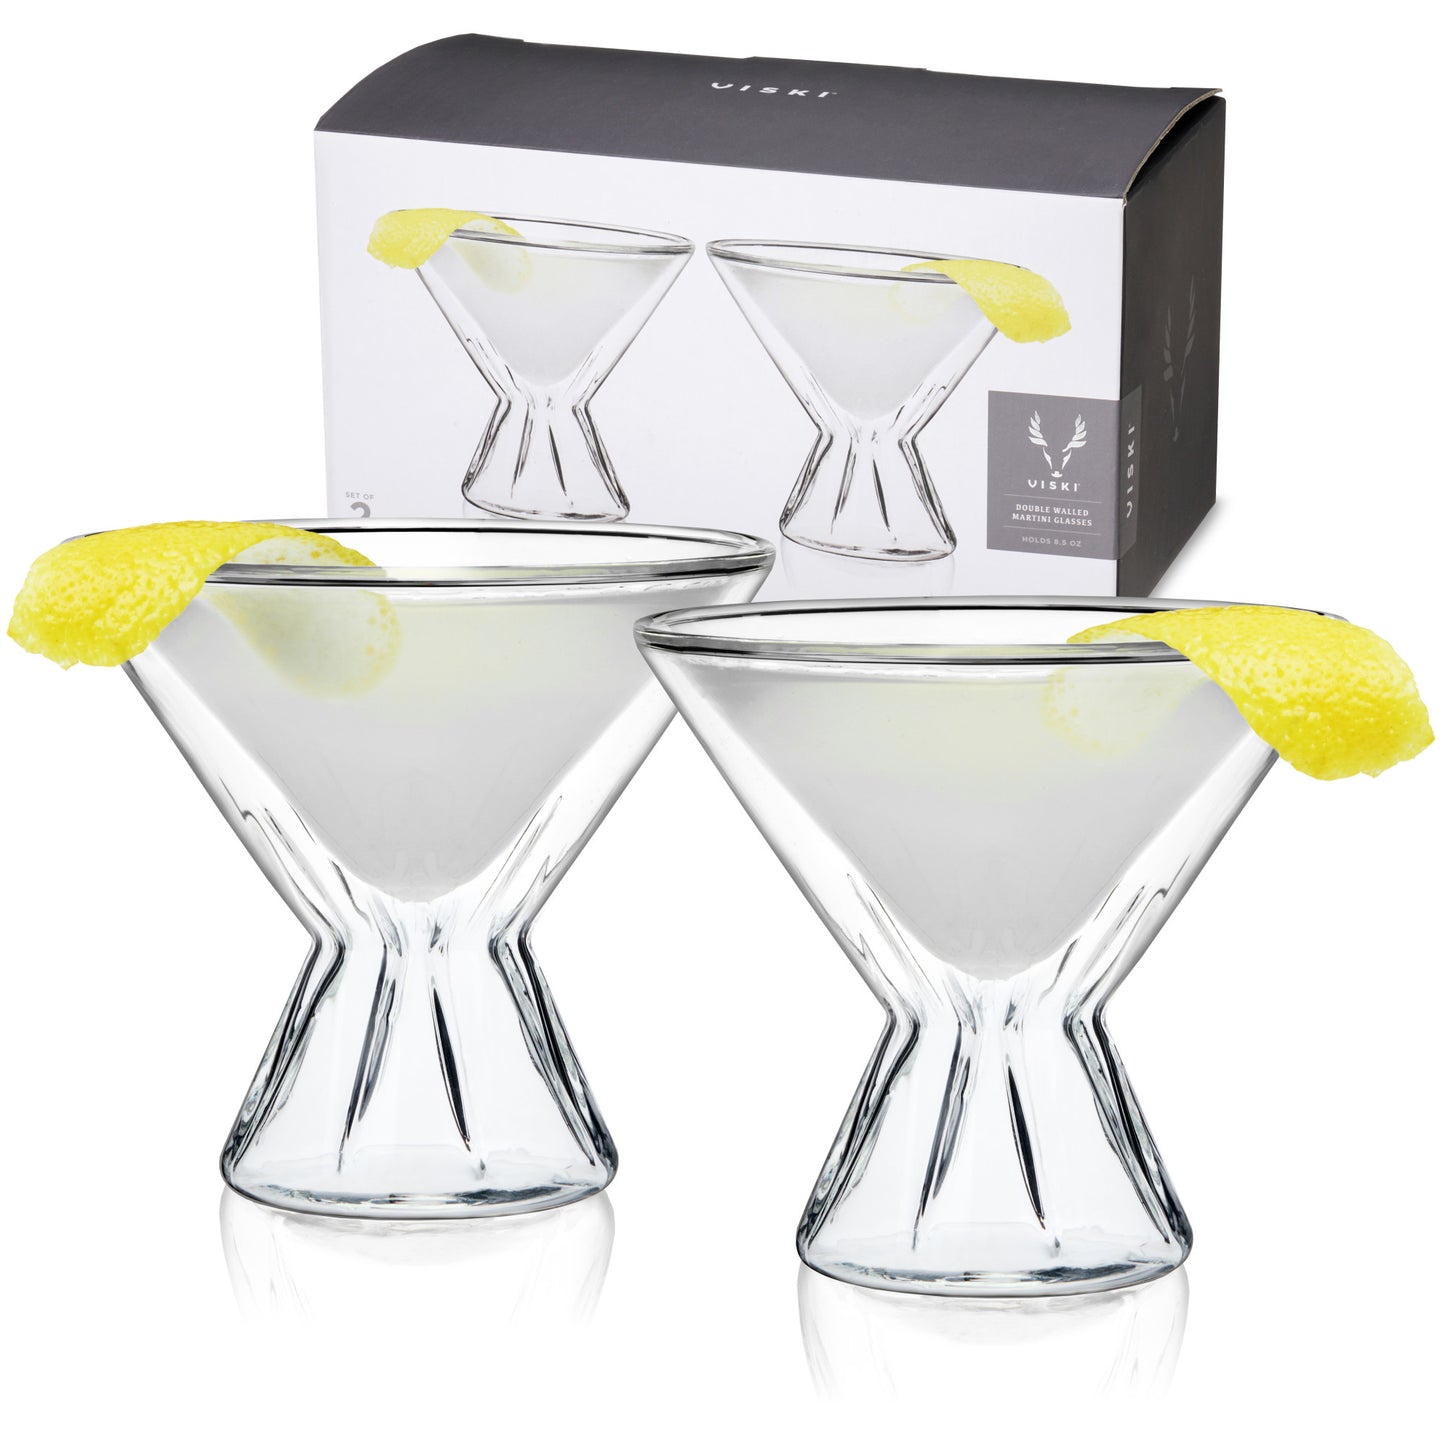 Double Walled Martini Glasses